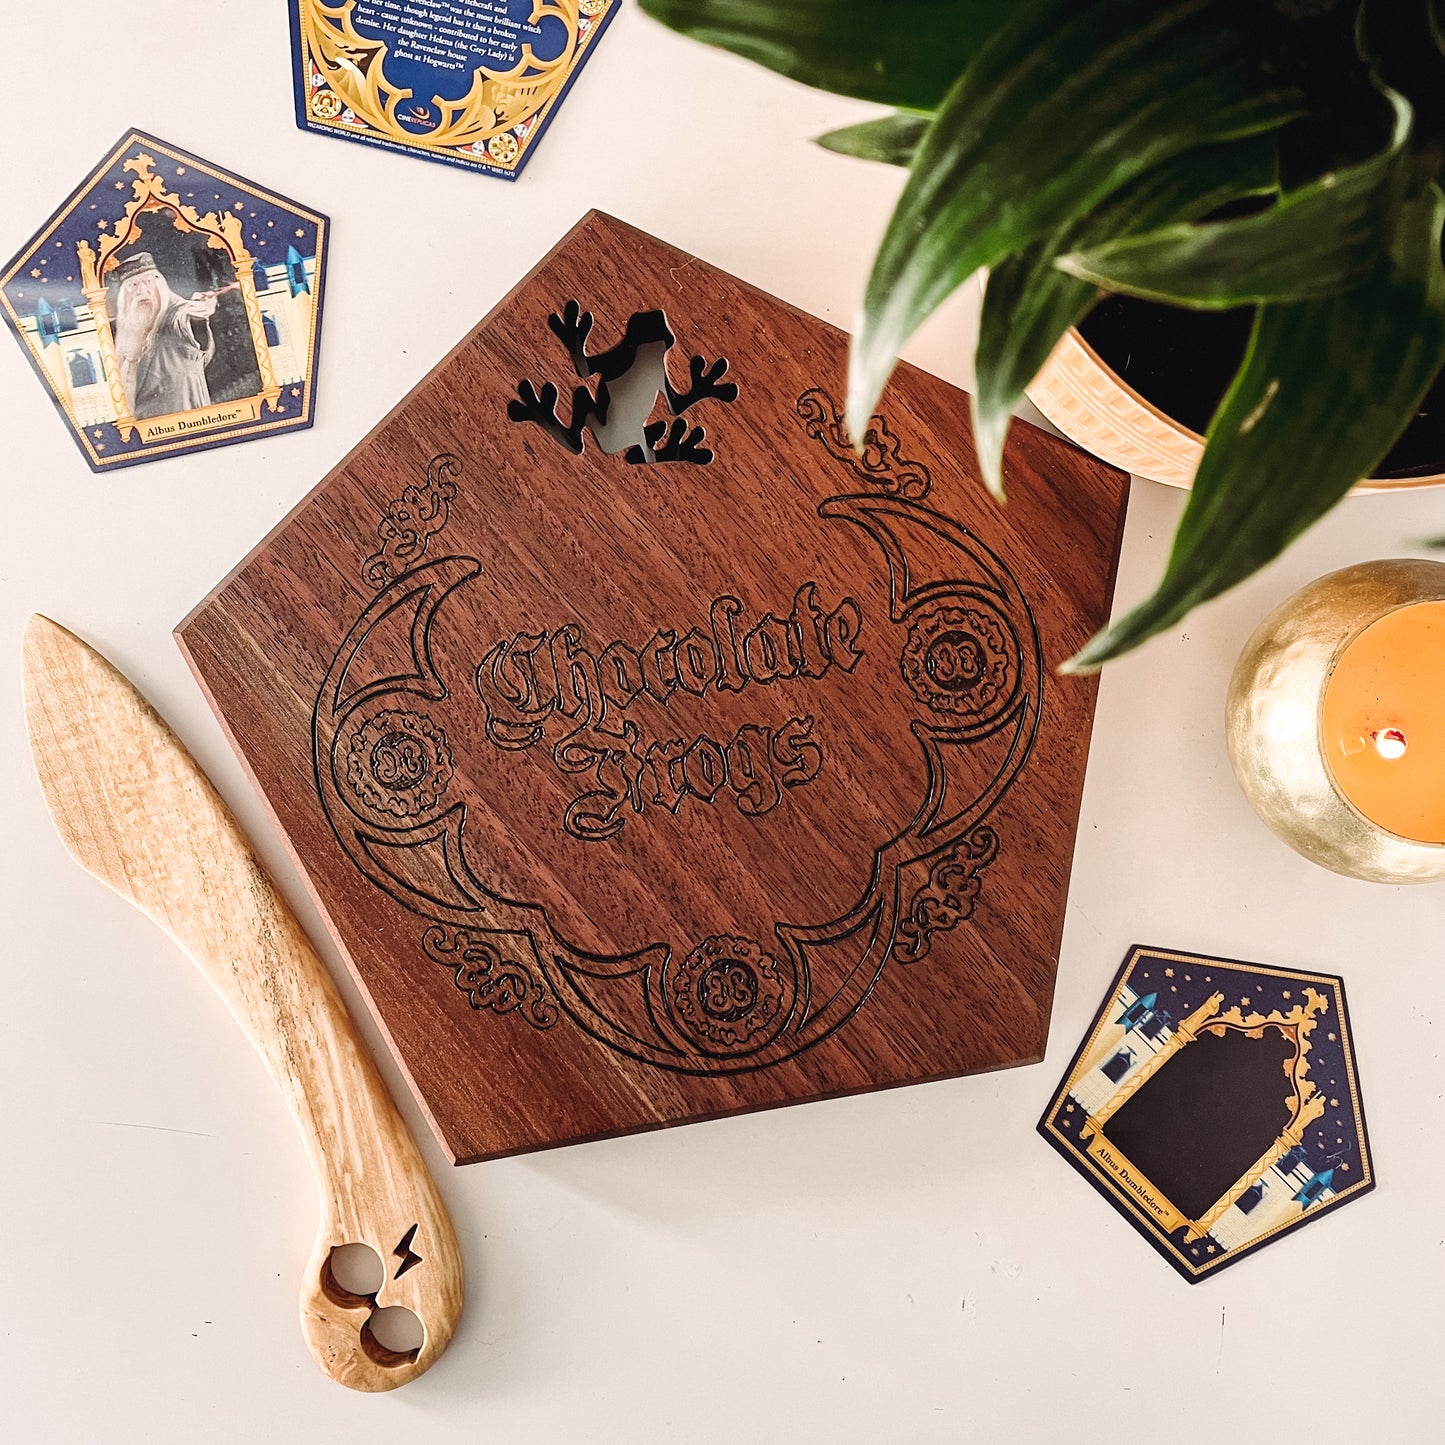 Chocolate frogs serving board